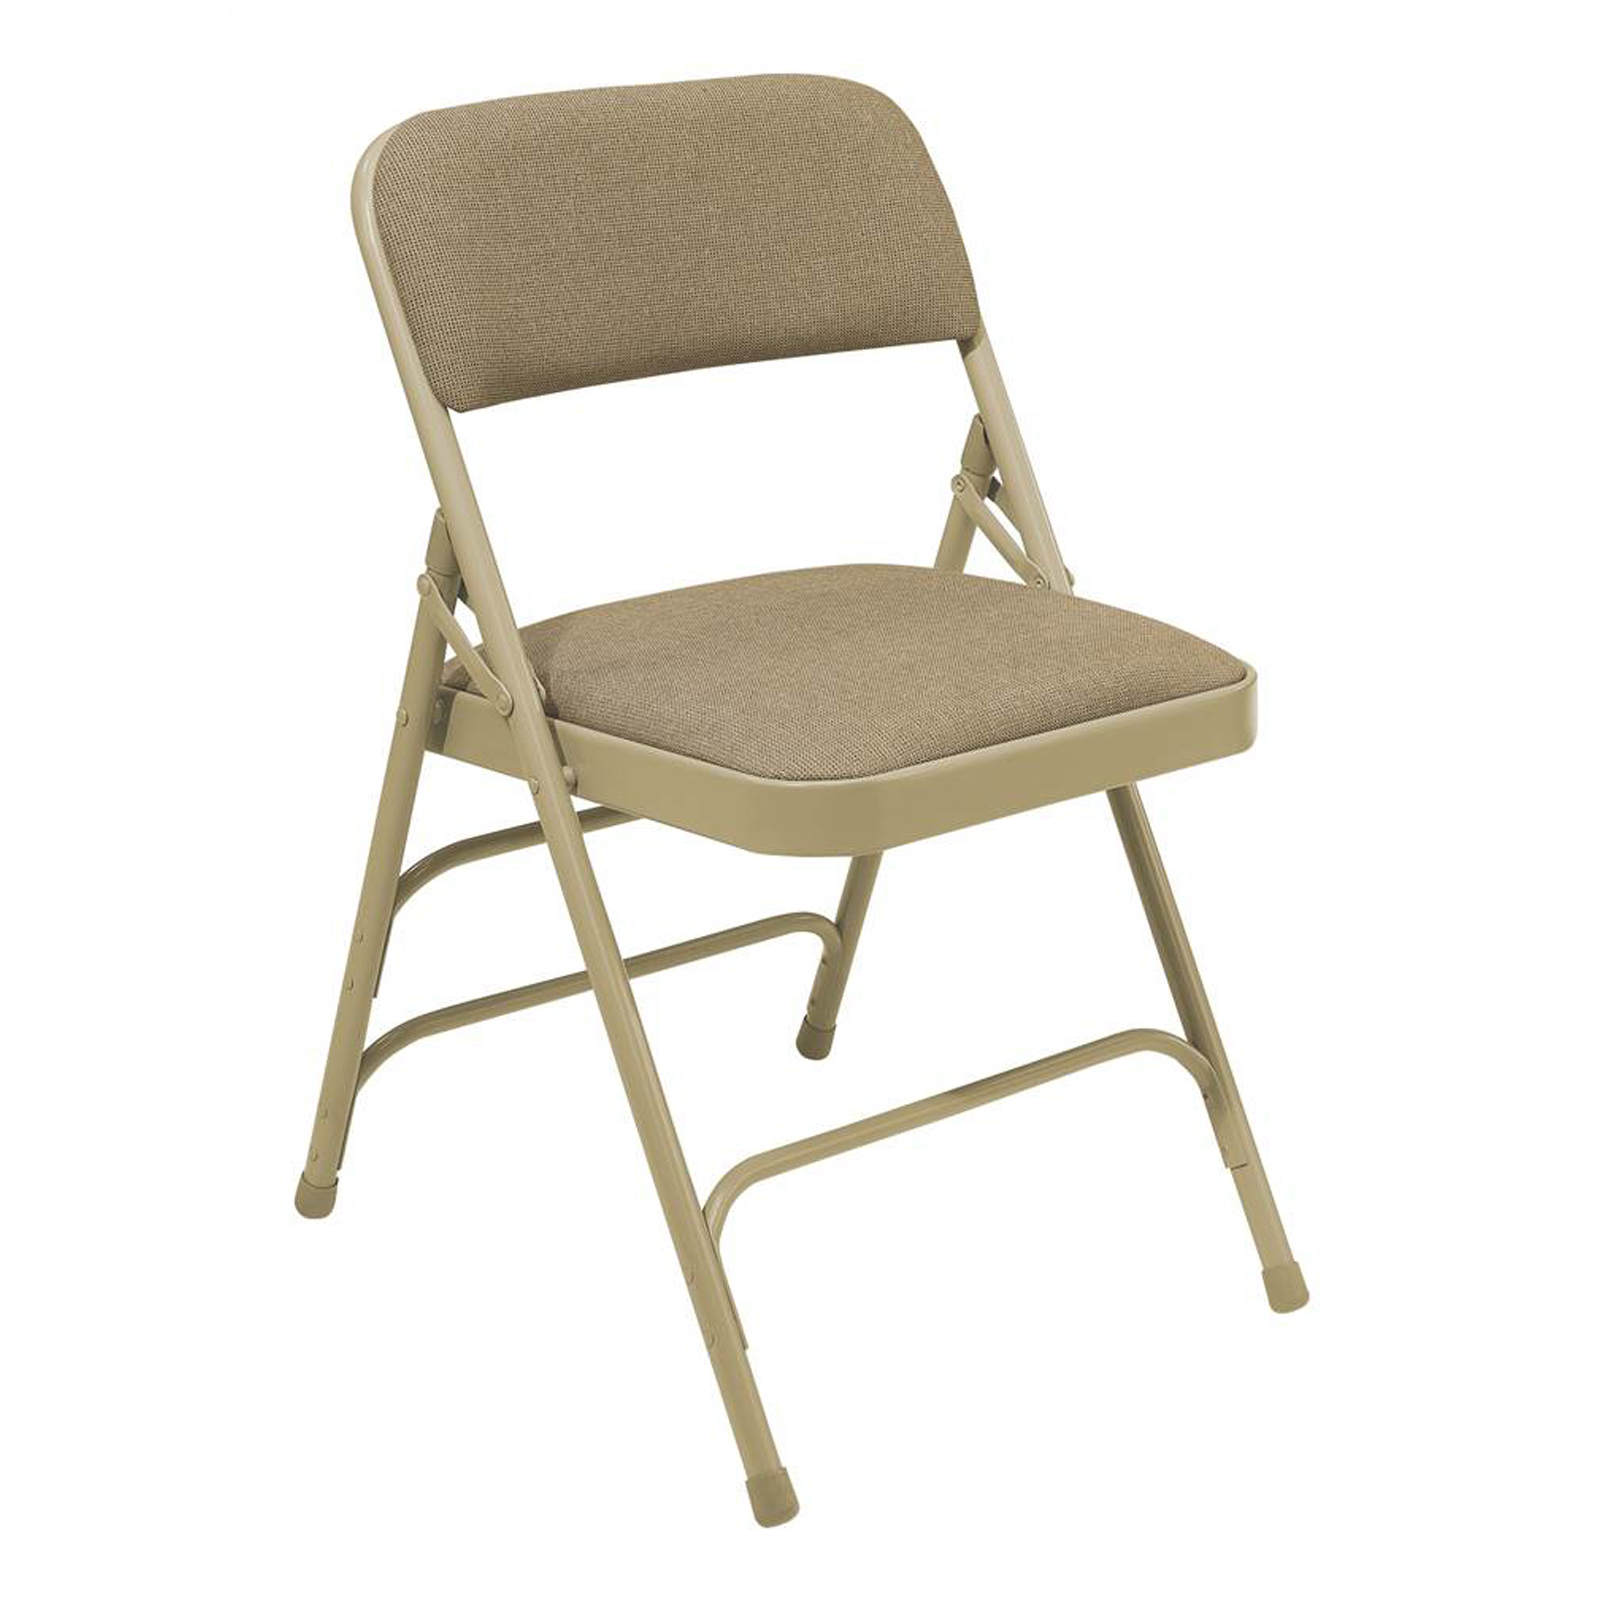 2300 Series Triple Strength Upholstered Folding Chair (Set of 4)